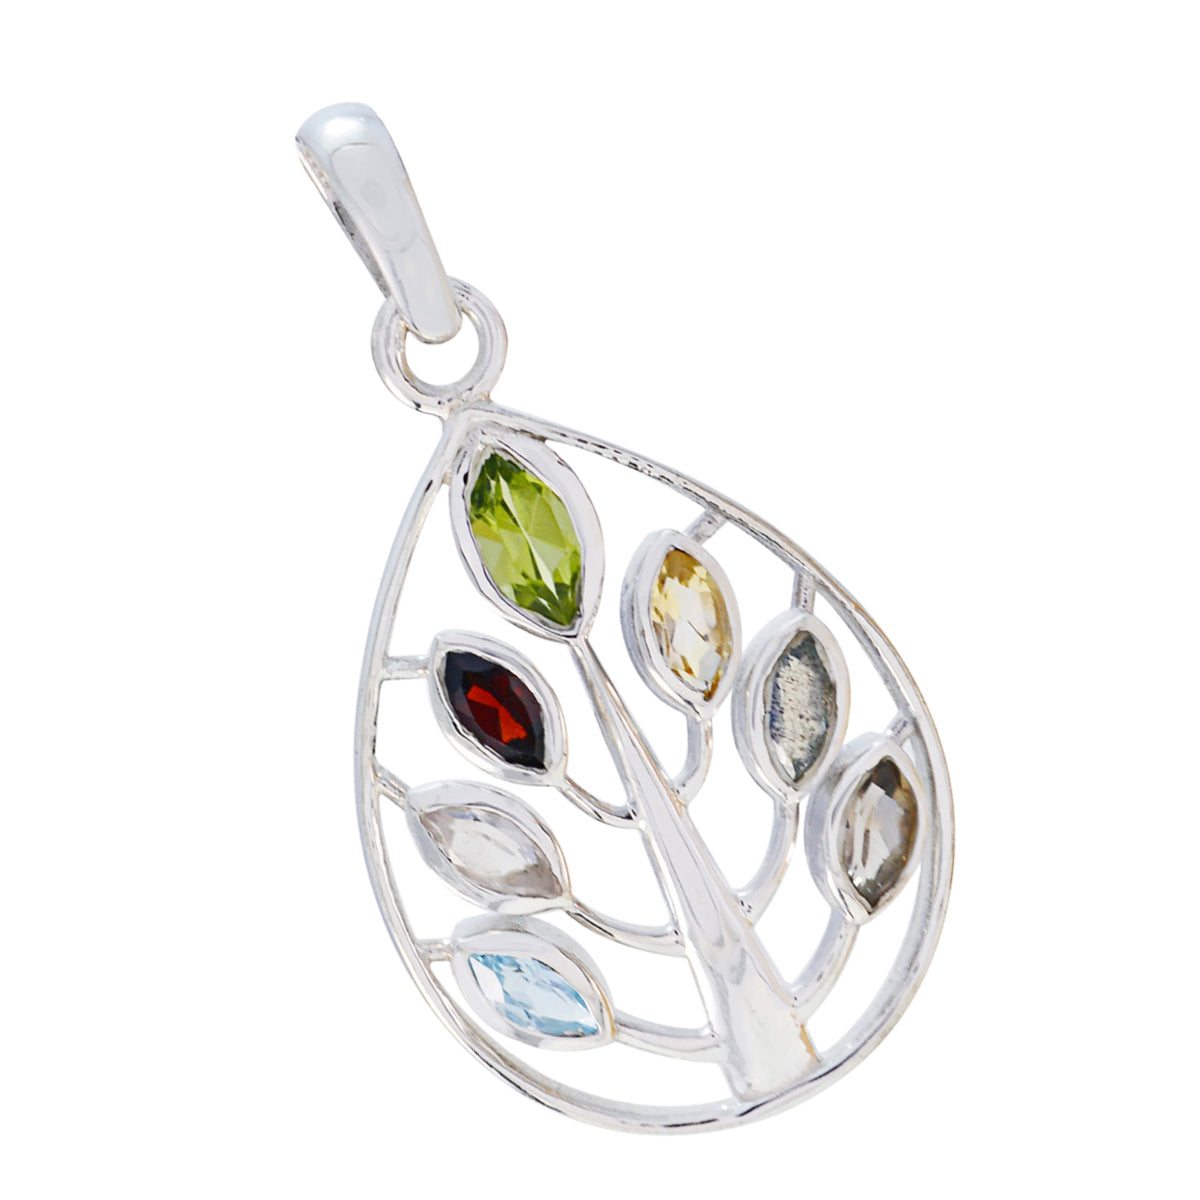 Riyo Hot Gems Marquise Faceted Multi Color Multi Stone Solid Silver Pendant Gift For Easter Sunday